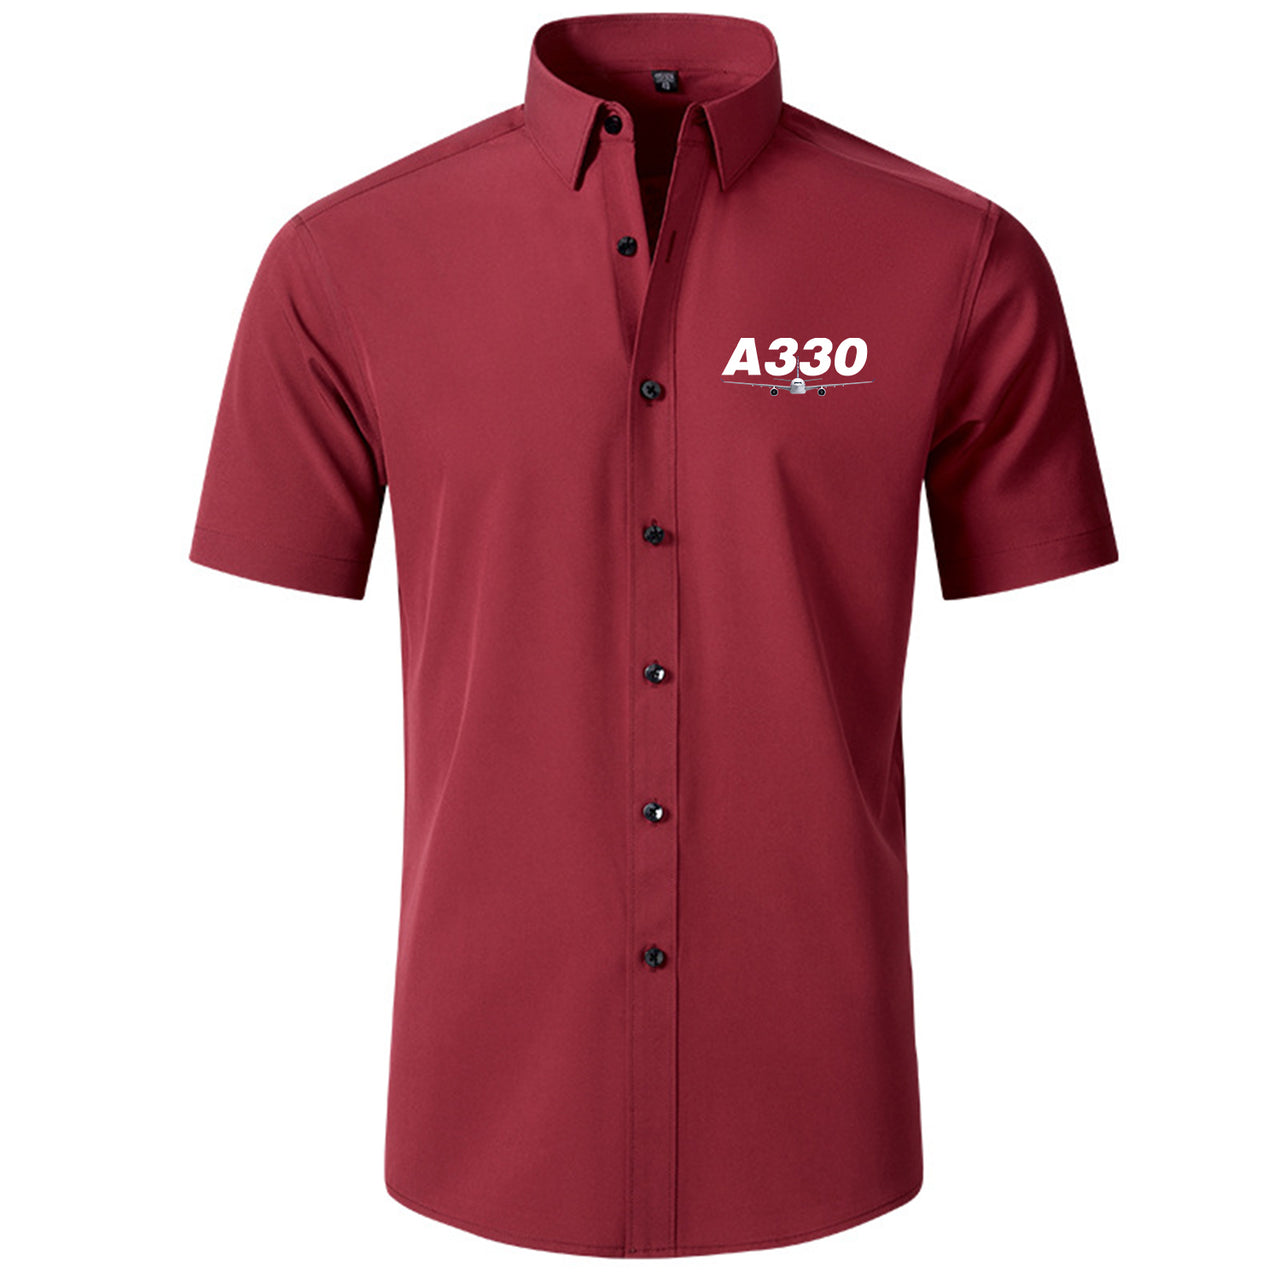 Super Airbus A330 Designed Short Sleeve Shirts